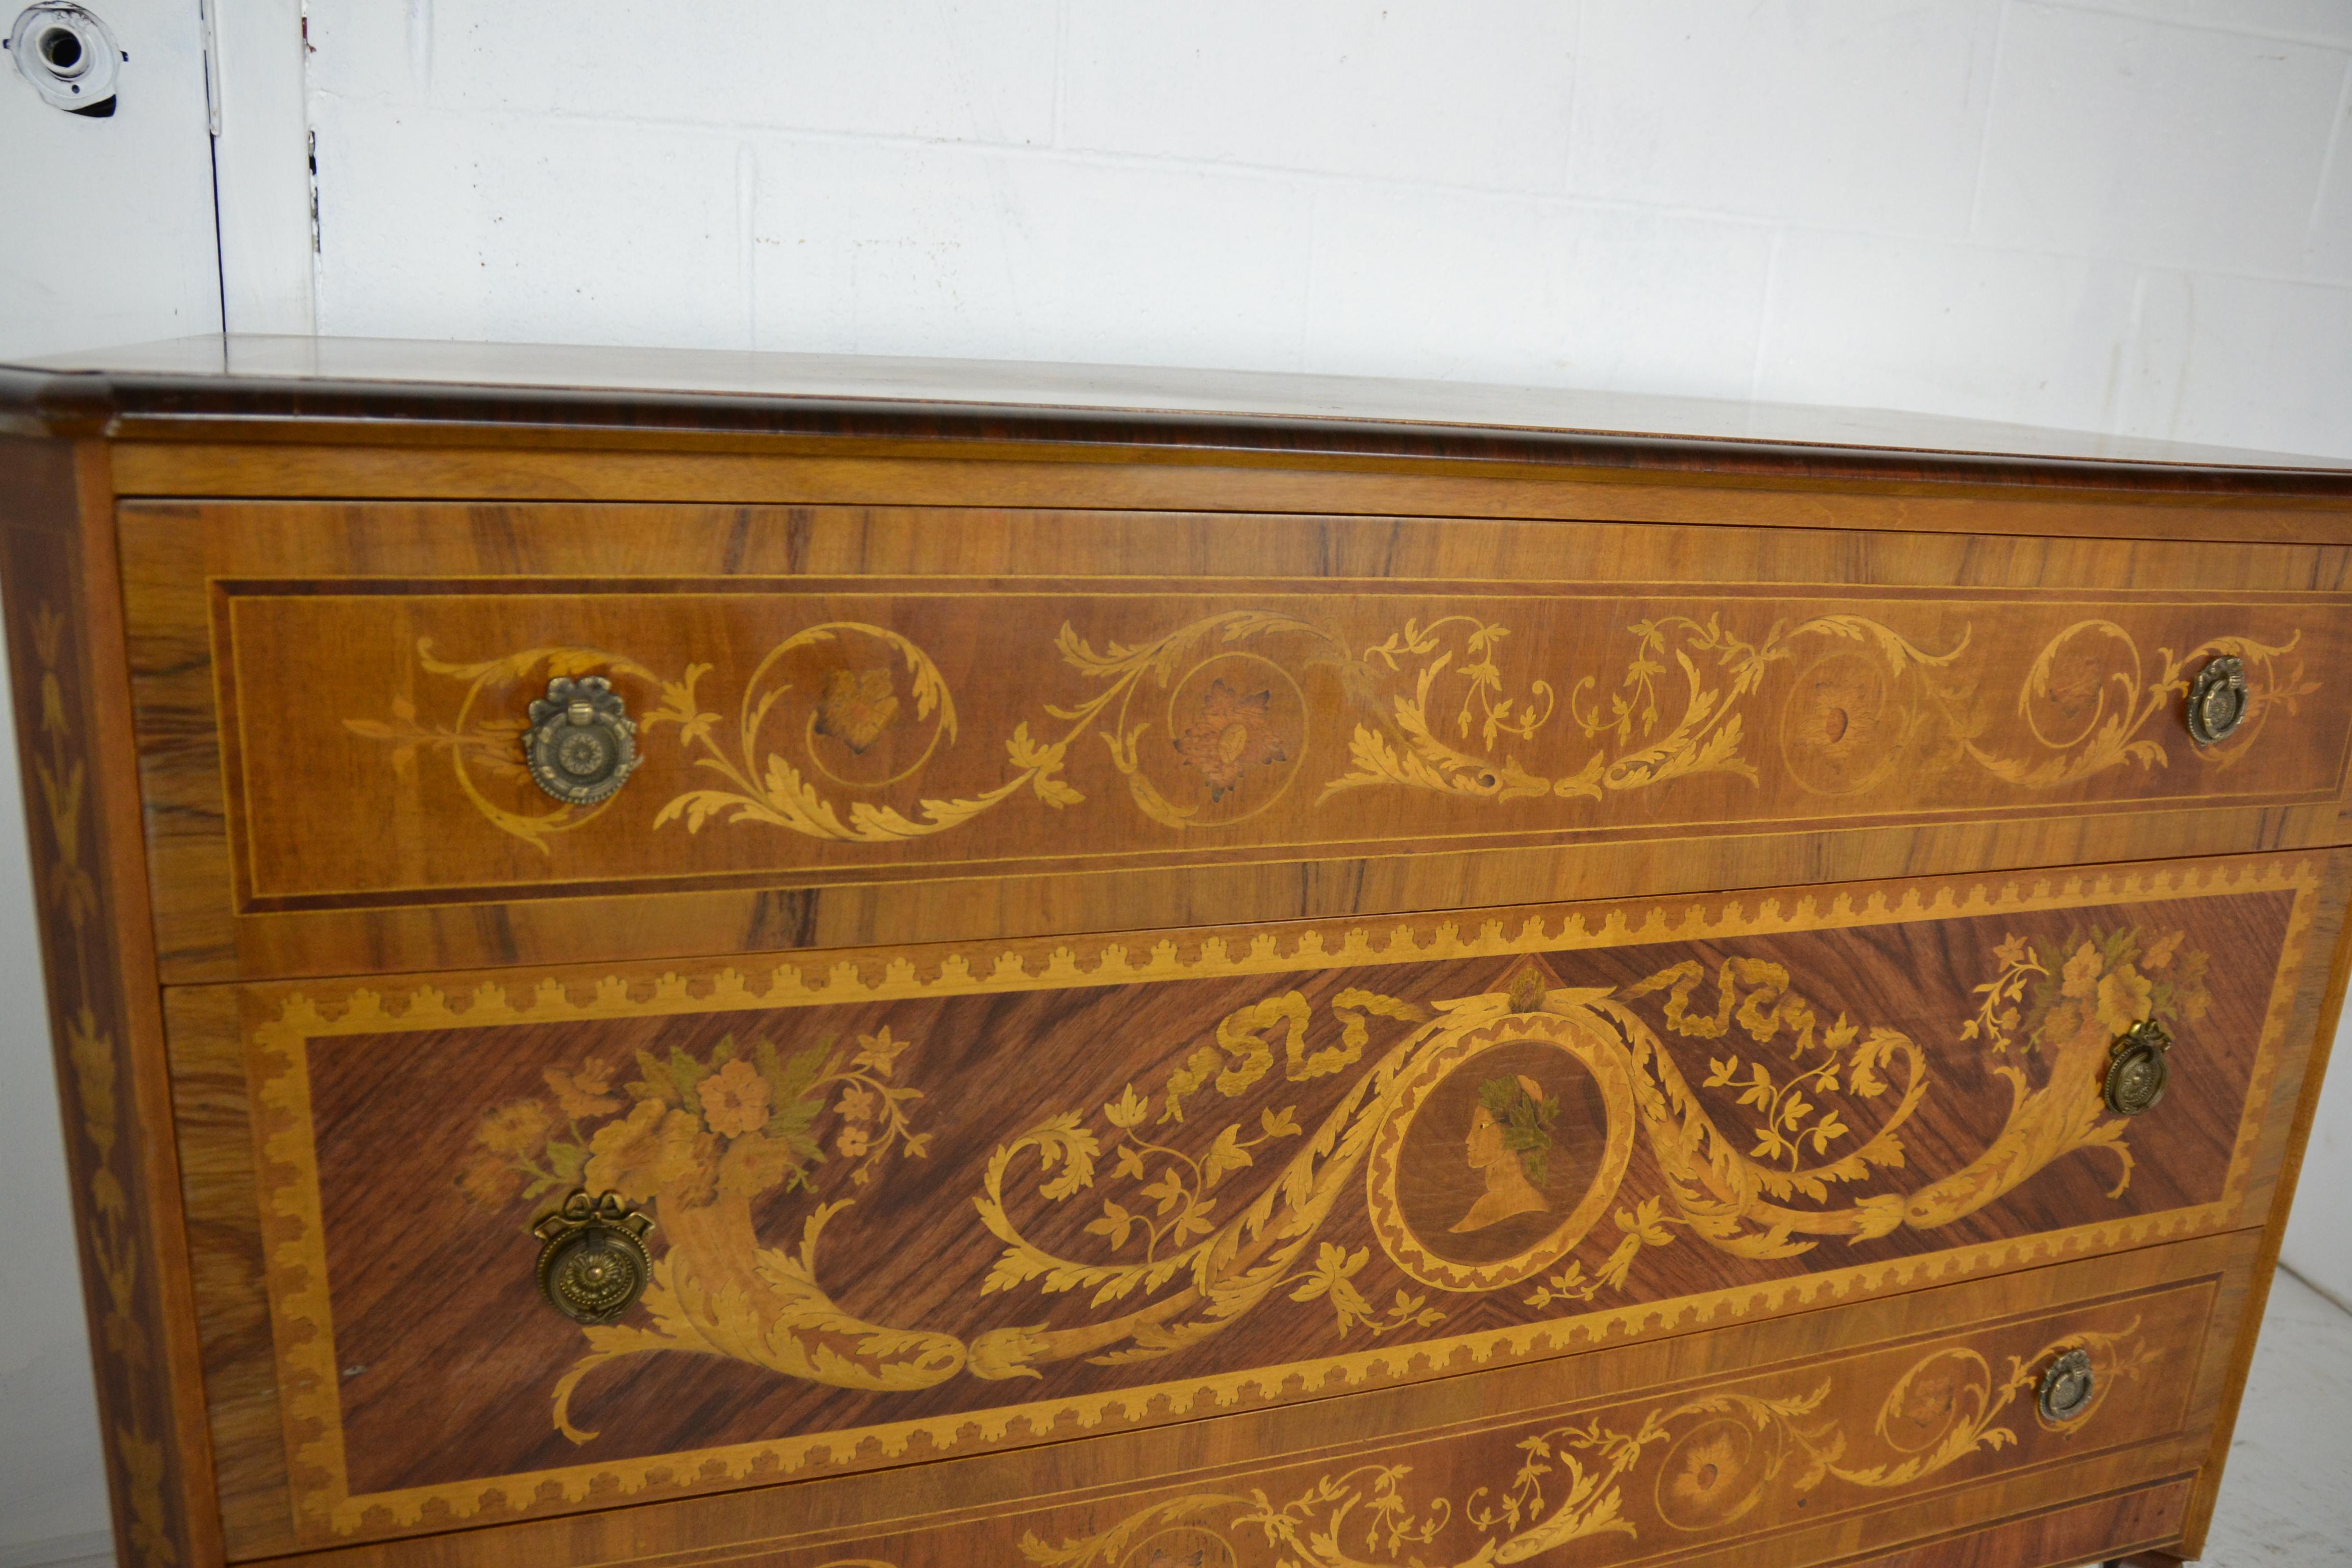 A quality made Italian 3 drawer chest of drawers with extensive inlays. Made from various woods including rosewood, olive-wood and mahogany. Top inlaid with a Peacock in a panel surrounded by Acanthus leaf and Floral displays. The center drawer